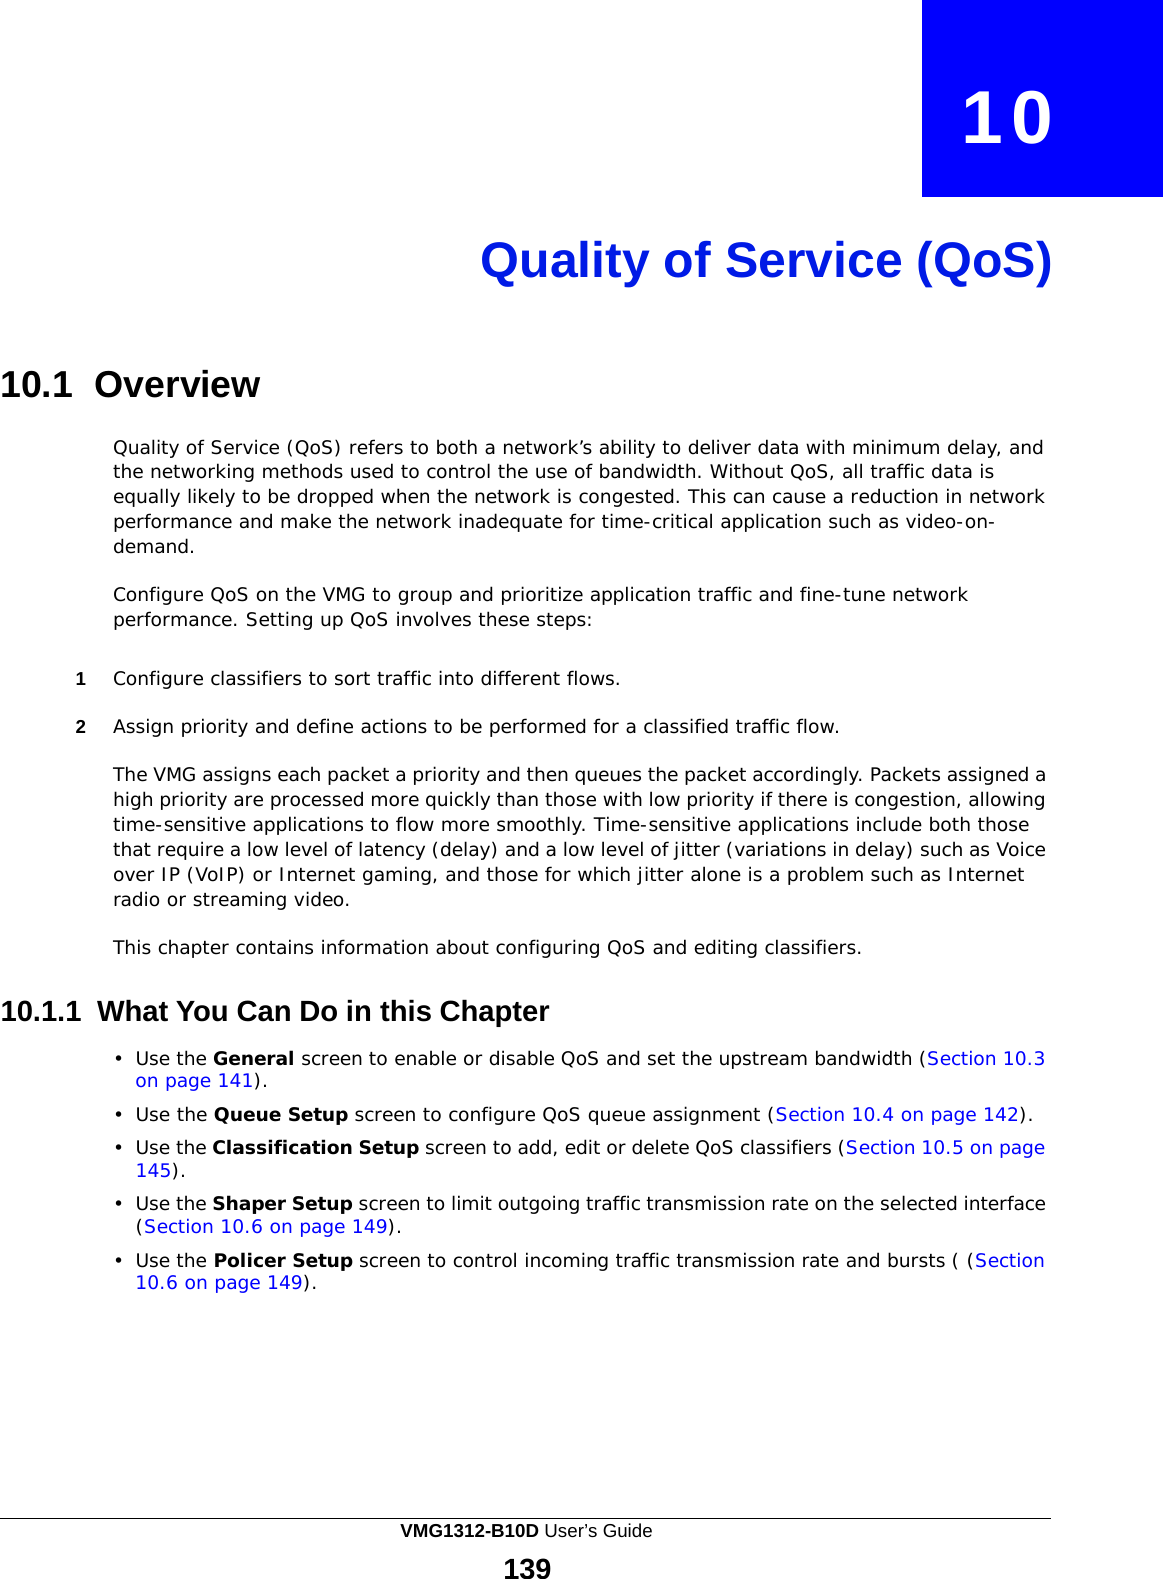  10     Quality of Service (QoS)     10.1 Overview  Quality of Service (QoS) refers to both a network’s ability to deliver data with minimum delay, and the networking methods used to control the use of bandwidth. Without QoS, all traffic data is equally likely to be dropped when the network is congested. This can cause a reduction in network performance and make the network inadequate for time-critical application such as video-on- demand.  Configure QoS on the VMG to group and prioritize application traffic and fine-tune network performance. Setting up QoS involves these steps:   1  Configure classifiers to sort traffic into different flows.  2  Assign priority and define actions to be performed for a classified traffic flow.  The VMG assigns each packet a priority and then queues the packet accordingly. Packets assigned a high priority are processed more quickly than those with low priority if there is congestion, allowing time-sensitive applications to flow more smoothly. Time-sensitive applications include both those that require a low level of latency (delay) and a low level of jitter (variations in delay) such as Voice over IP (VoIP) or Internet gaming, and those for which jitter alone is a problem such as Internet radio or streaming video.  This chapter contains information about configuring QoS and editing classifiers.   10.1.1 What You Can Do in this Chapter  •  Use the General screen to enable or disable QoS and set the upstream bandwidth (Section 10.3 on page 141).  •  Use the Queue Setup screen to configure QoS queue assignment (Section 10.4 on page 142).  •  Use the Classification Setup screen to add, edit or delete QoS classifiers (Section 10.5 on page 145).  •  Use the Shaper Setup screen to limit outgoing traffic transmission rate on the selected interface (Section 10.6 on page 149).  •  Use the Policer Setup screen to control incoming traffic transmission rate and bursts ( (Section 10.6 on page 149). VMG1312-B10D User’s Guide 139  